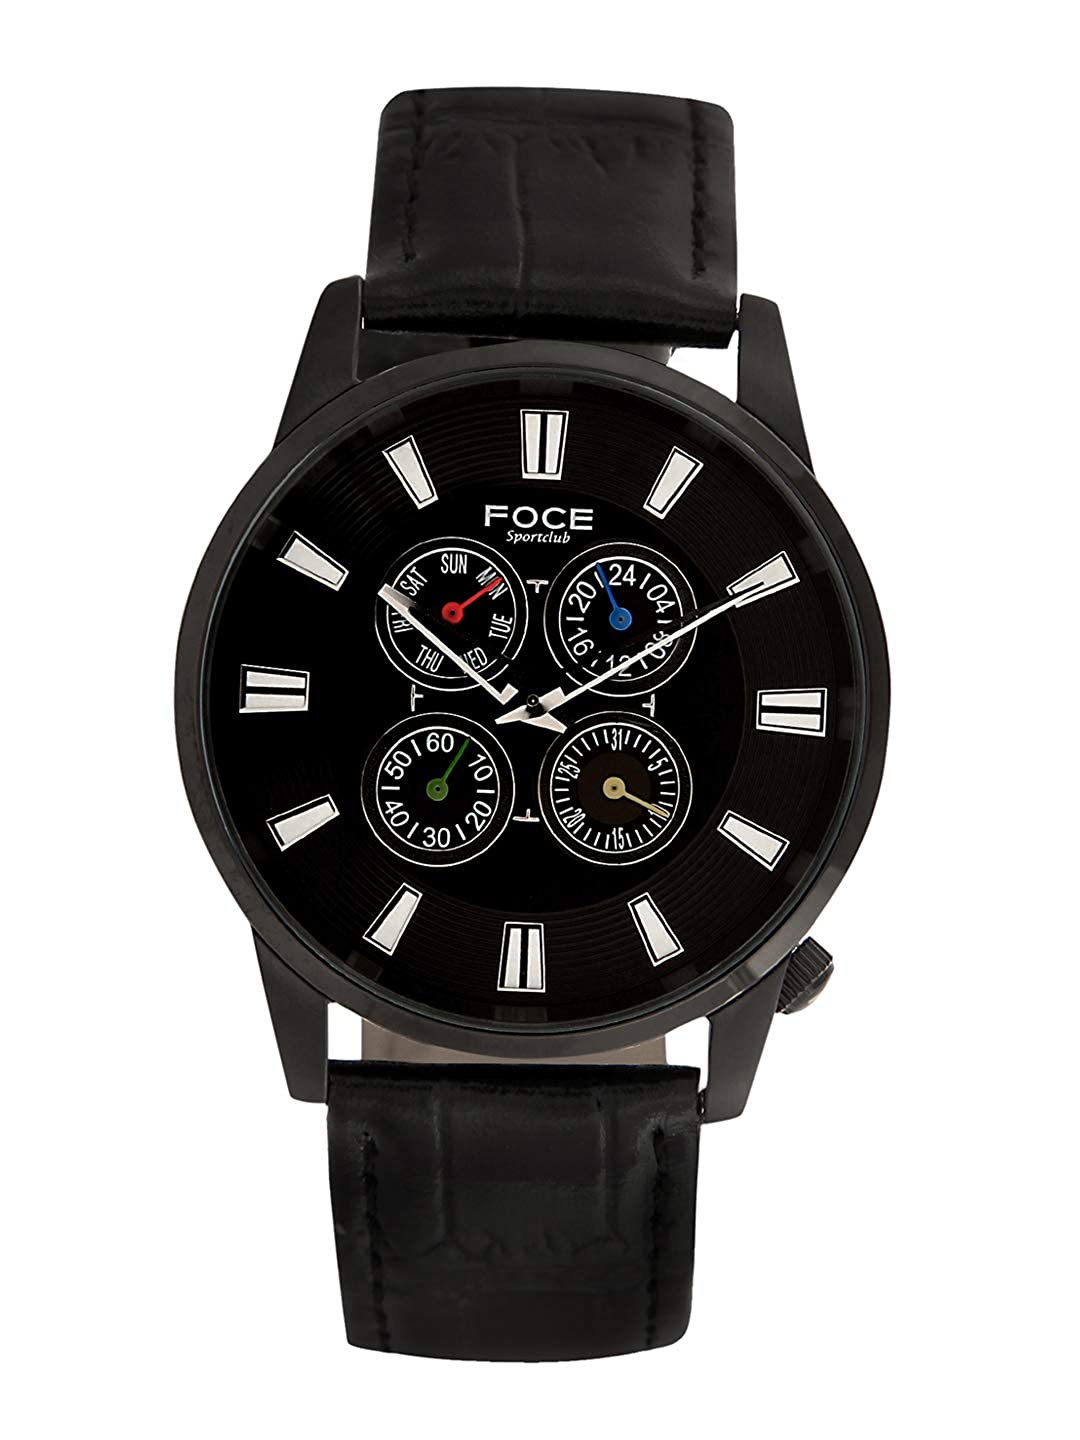 FOCE Multifunction Black Dial Leather Strap Watch For Men-F988GBL-BLACK